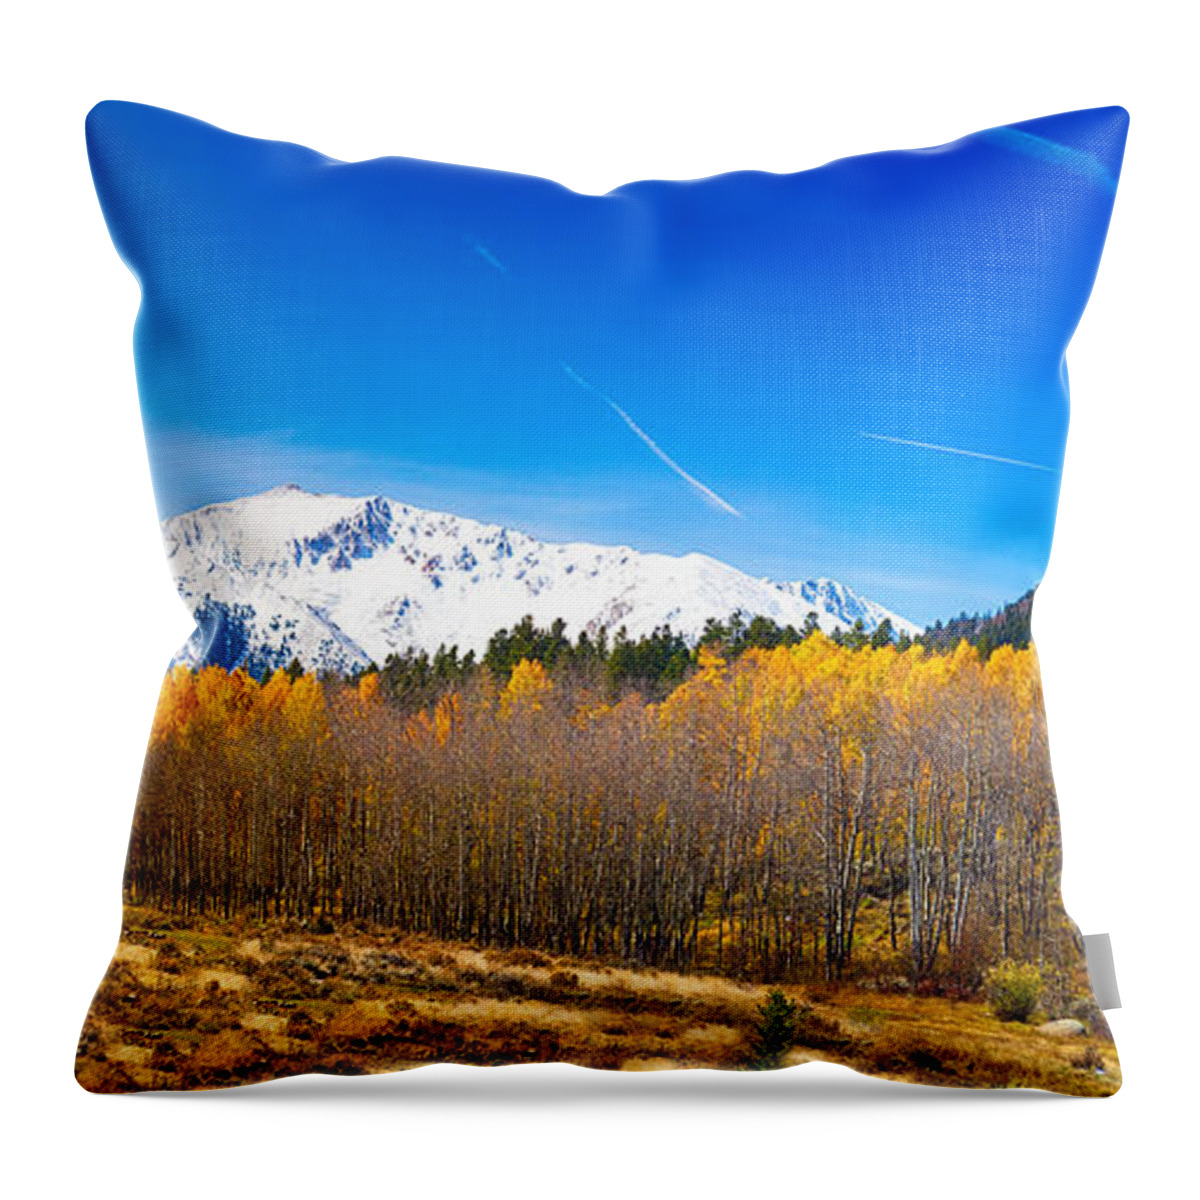 Snow Throw Pillow featuring the photograph Colorado Rocky Mountain Independence Pass Autumn Pano 1 by James BO Insogna